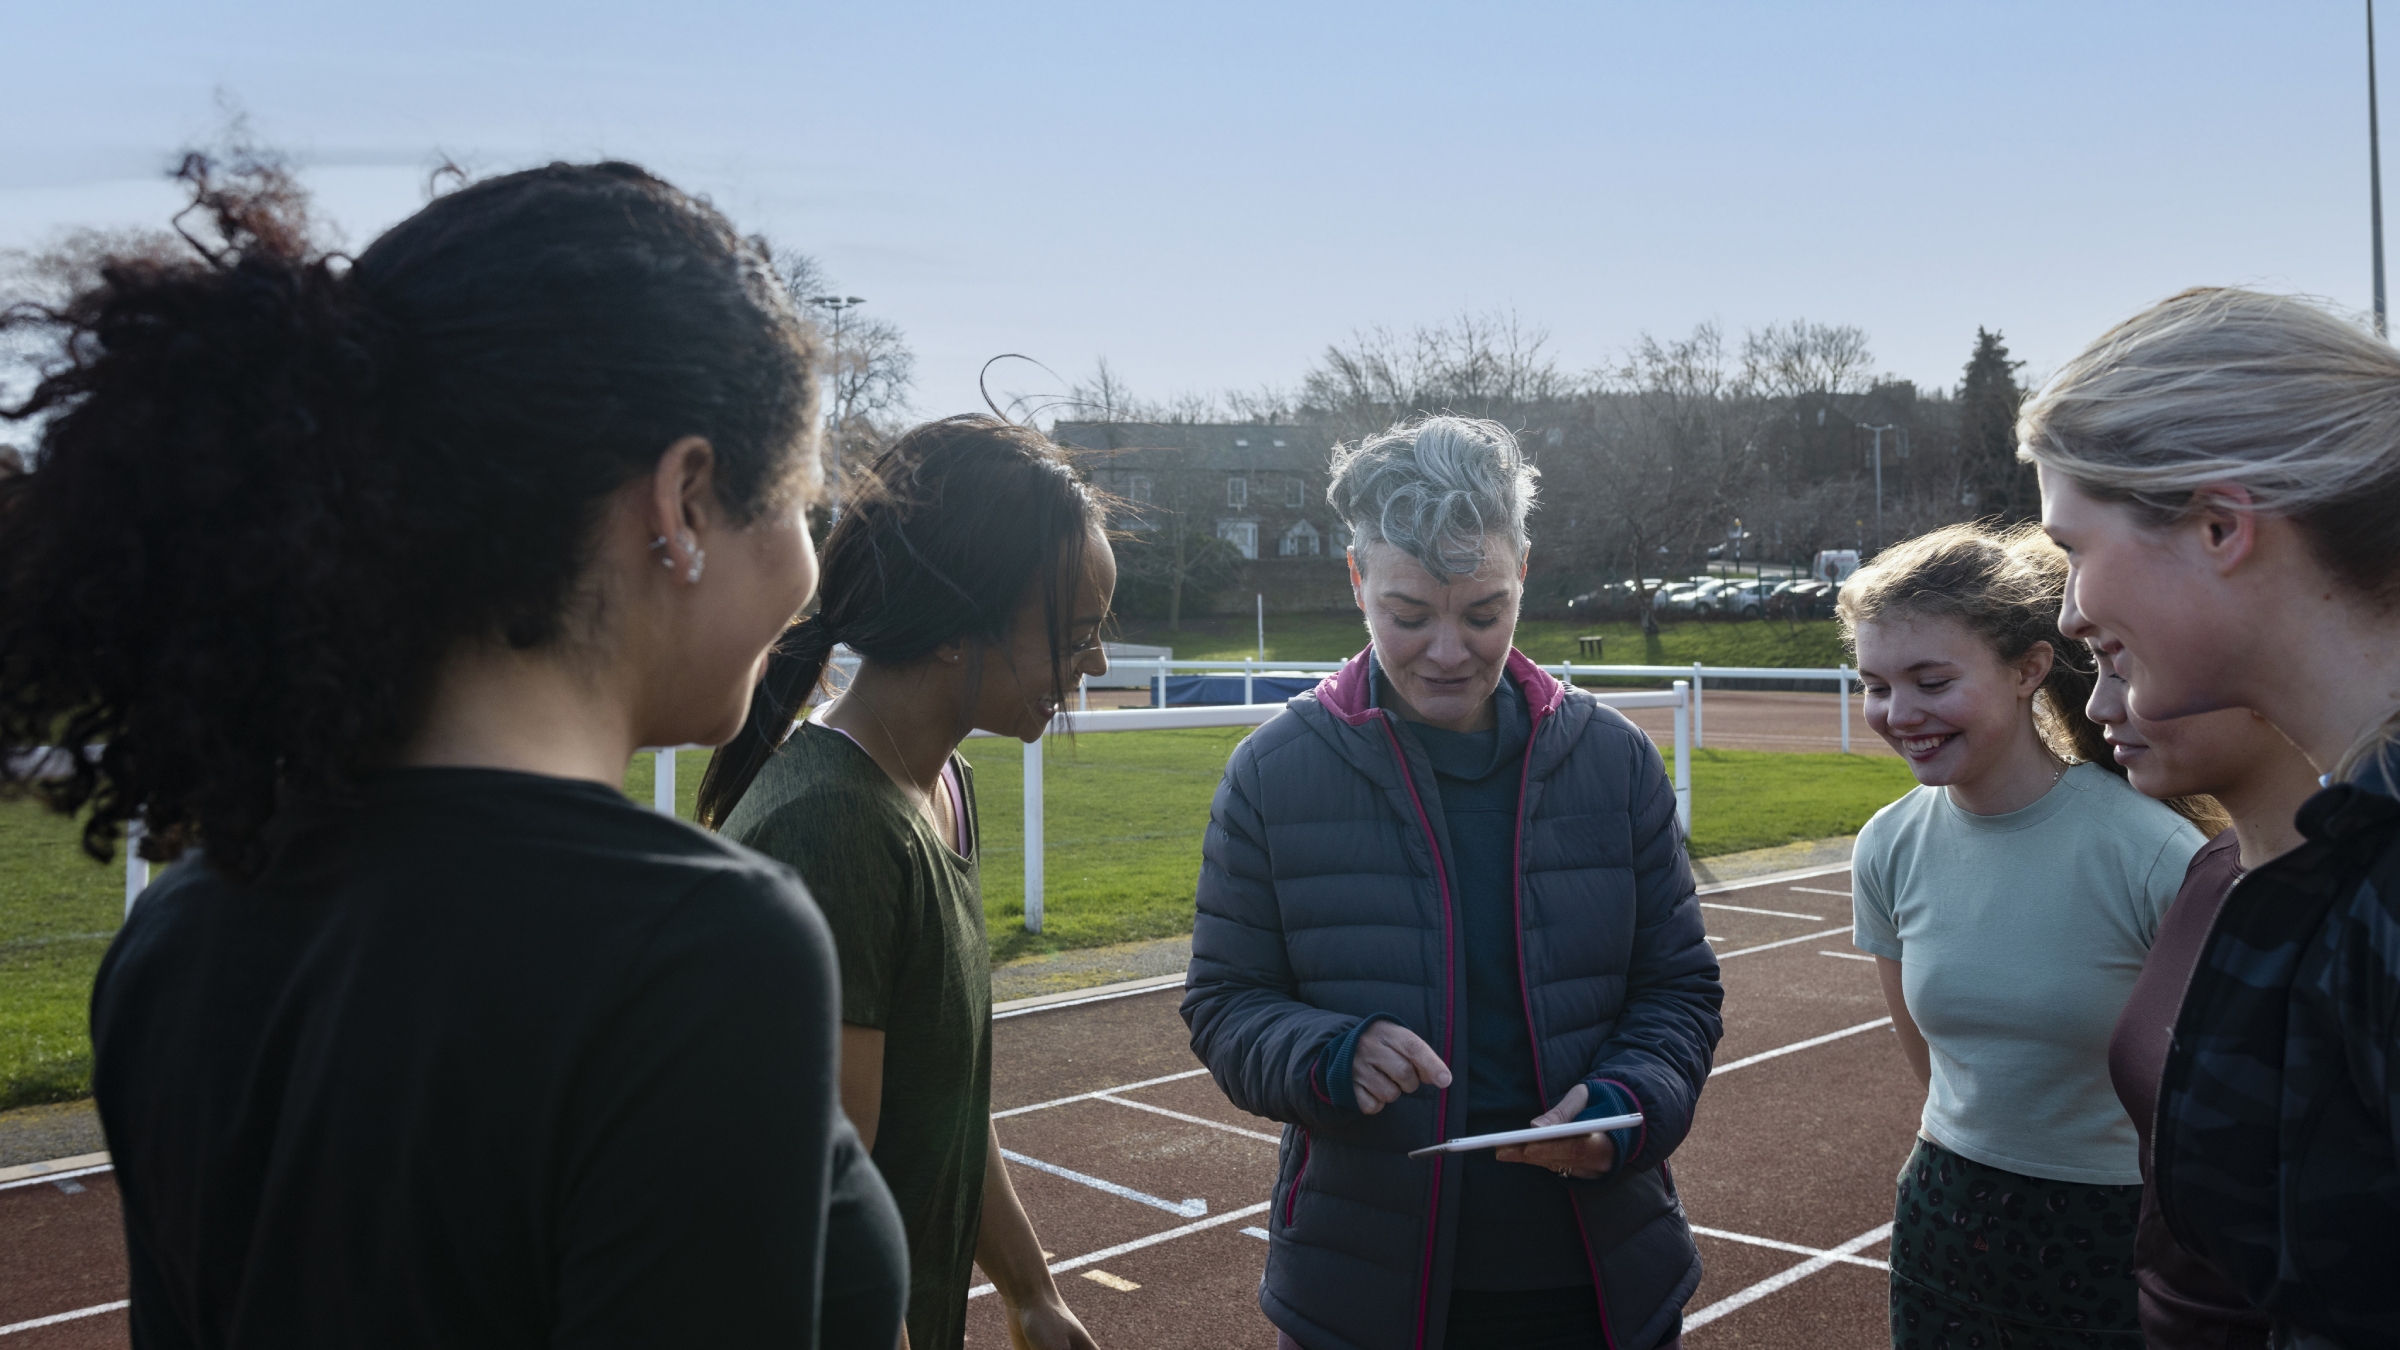 A coach and her athletes look at her tablet before running a track workout